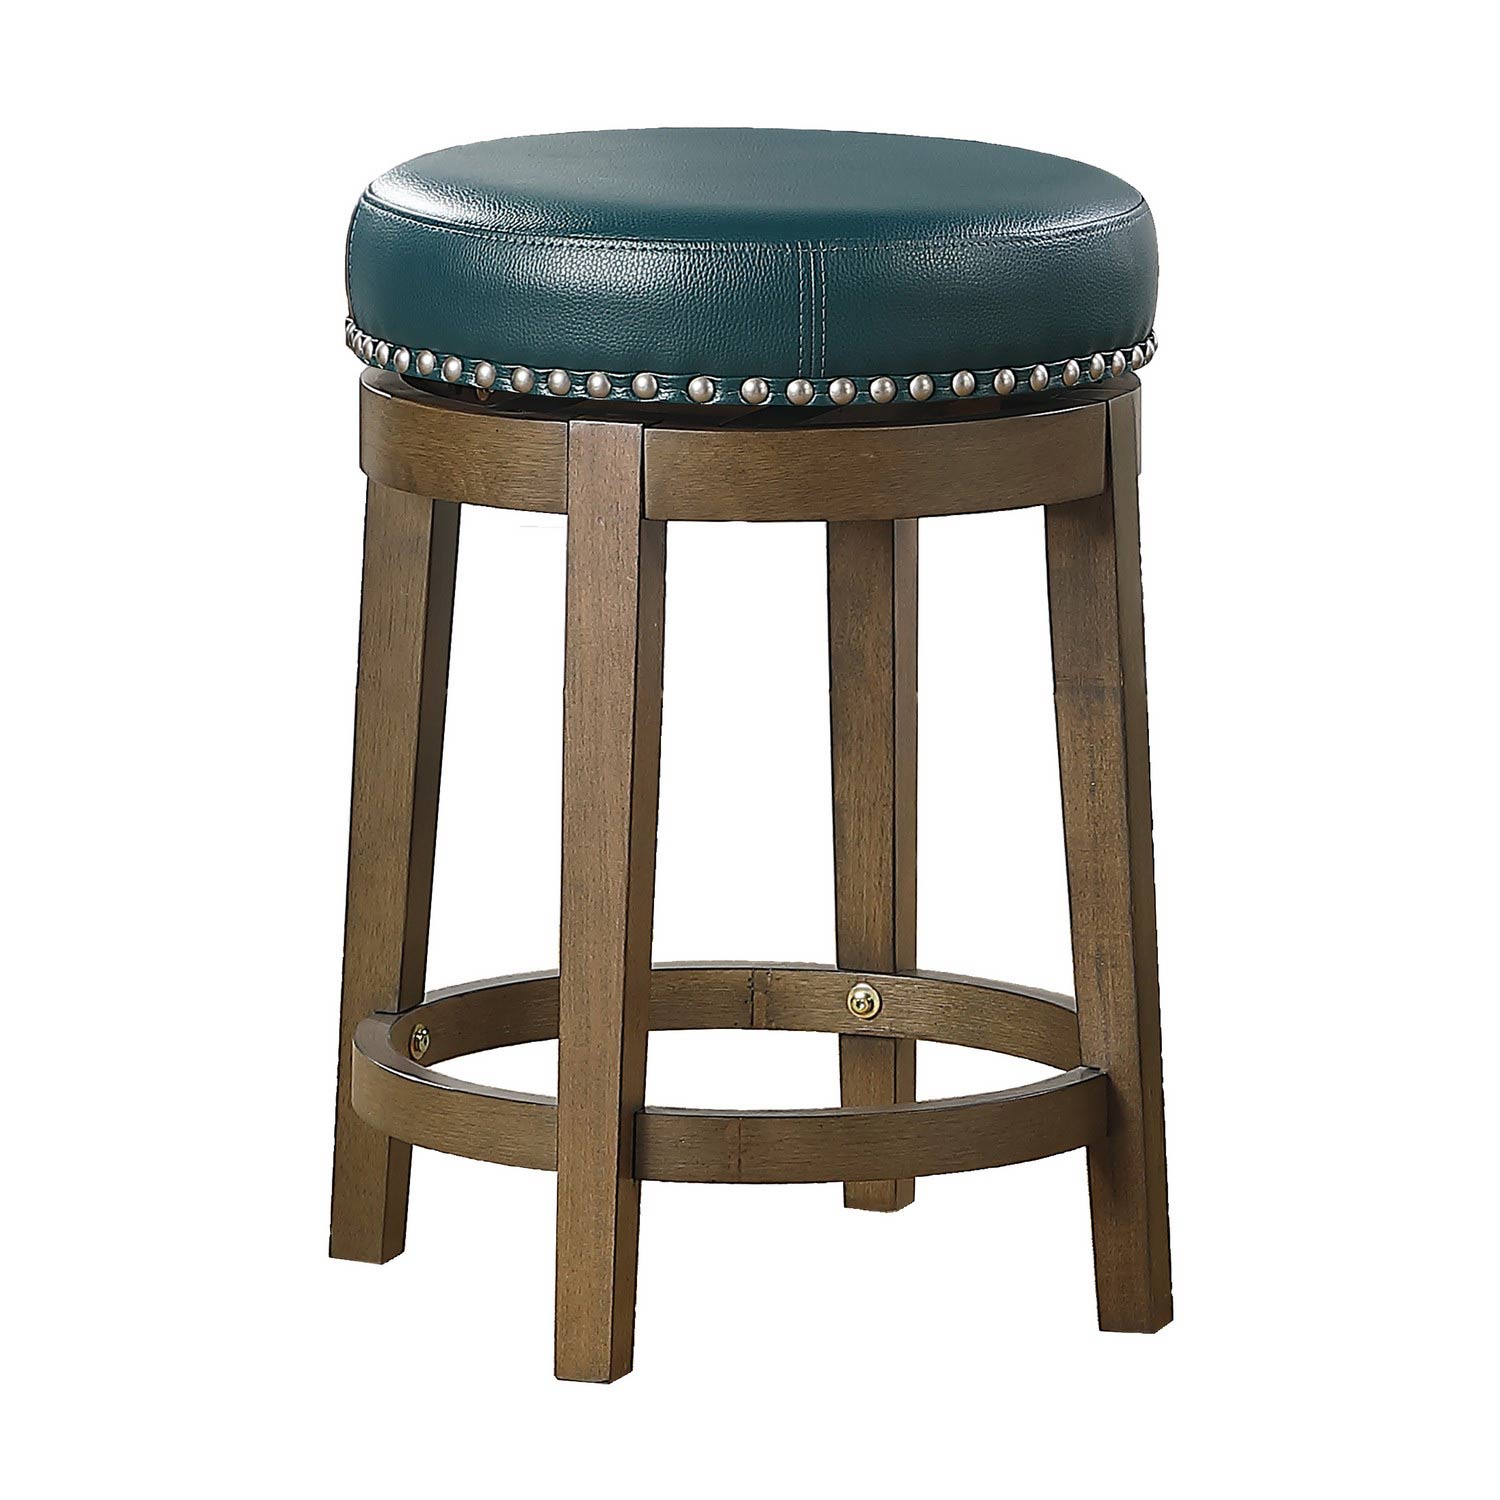 Homelegance Westby Swivel Counter Height Stool - Green - Brown